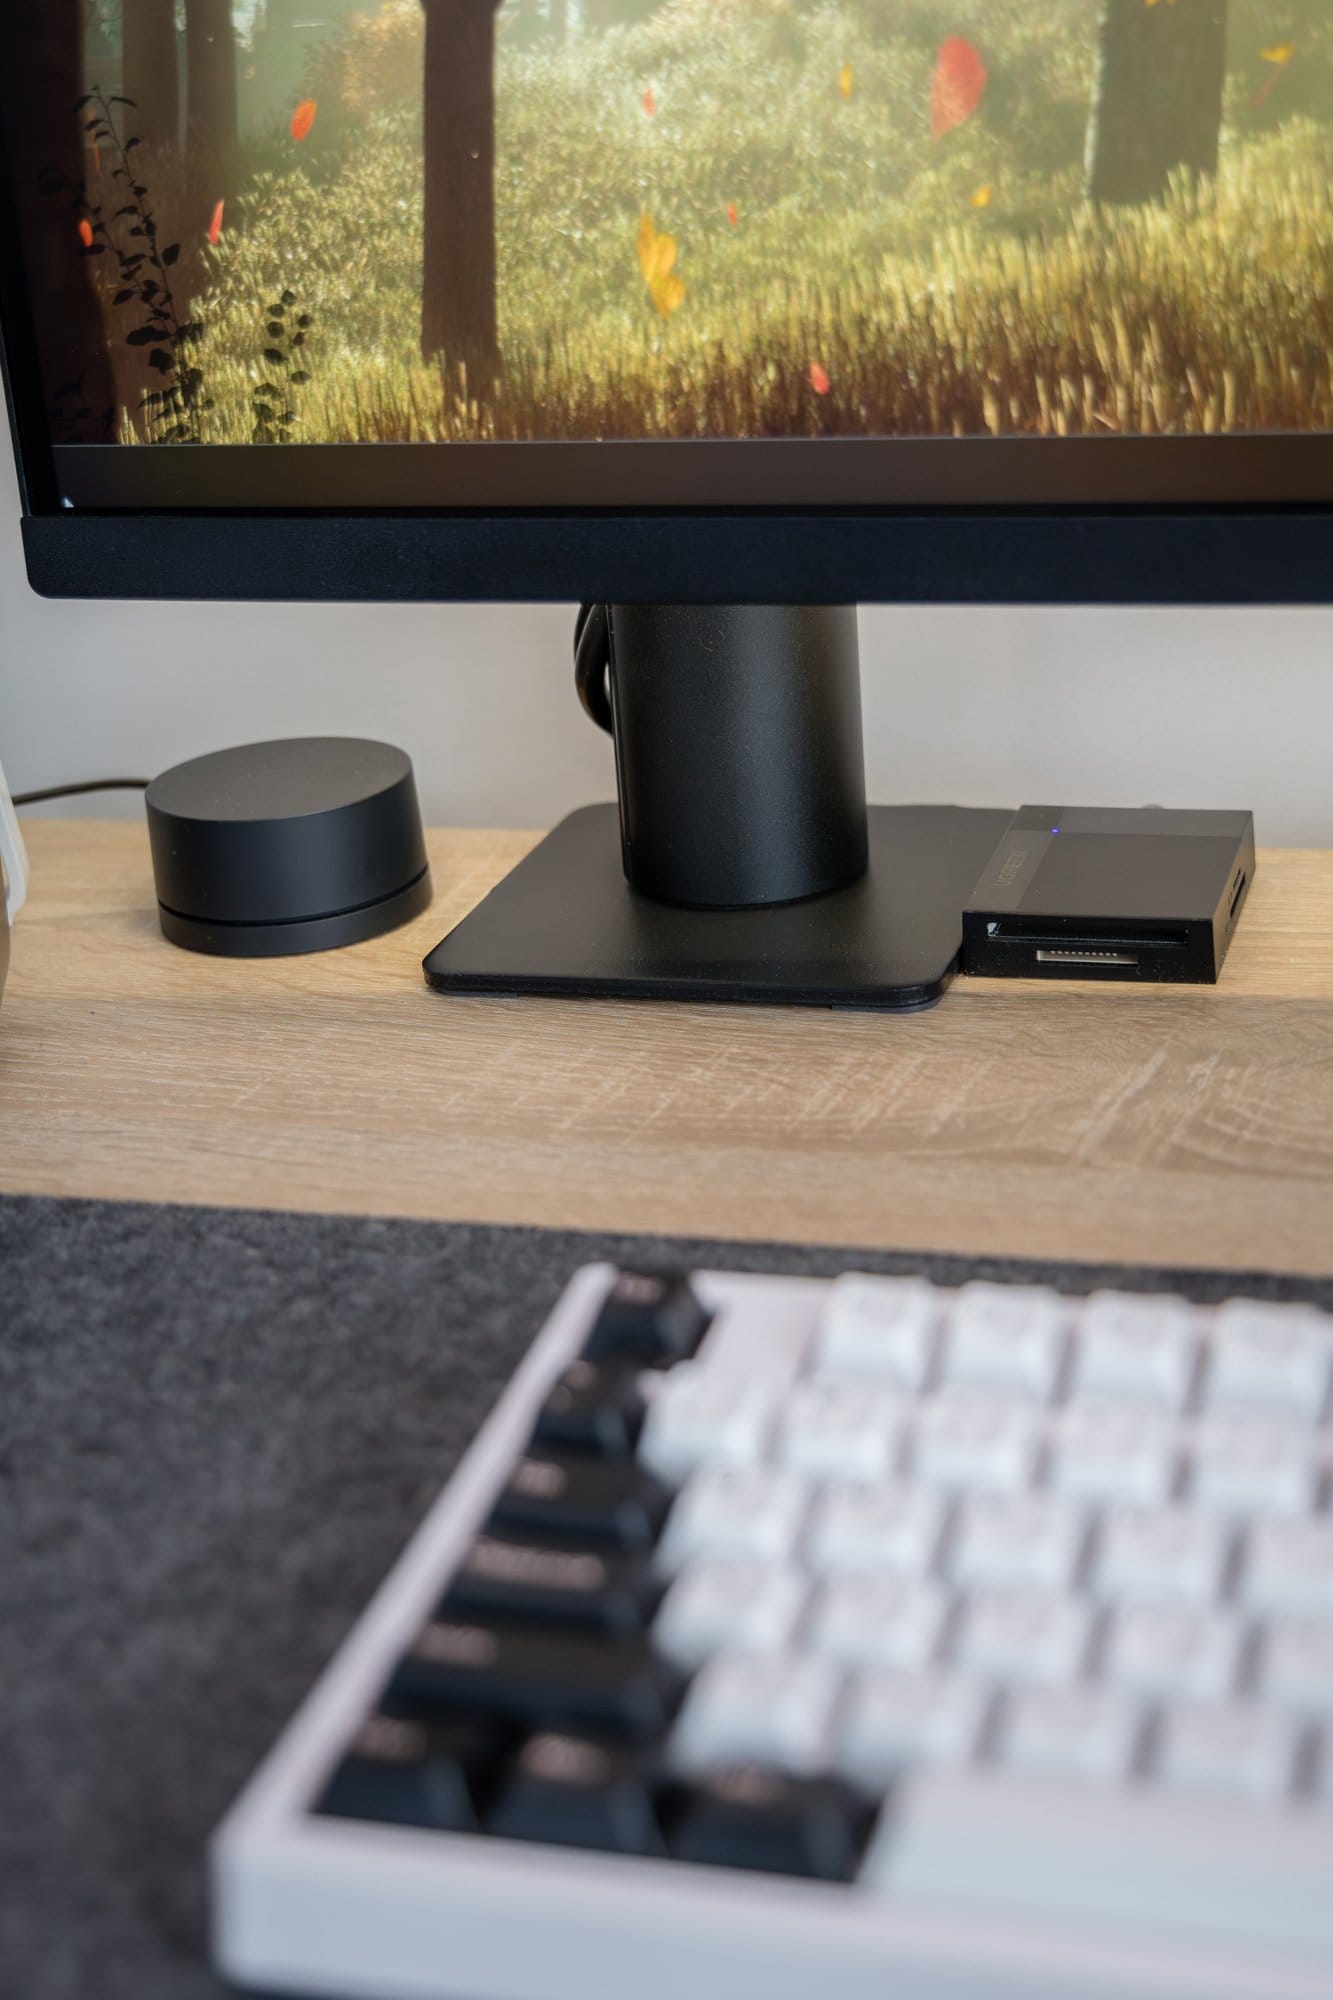 A desk setup detail showing the base of a monitor, a soundbar, and a sleek external drive, with the corner of a white mechanical keyboard in the foreground, all atop a wooden desk with a grey desk mat